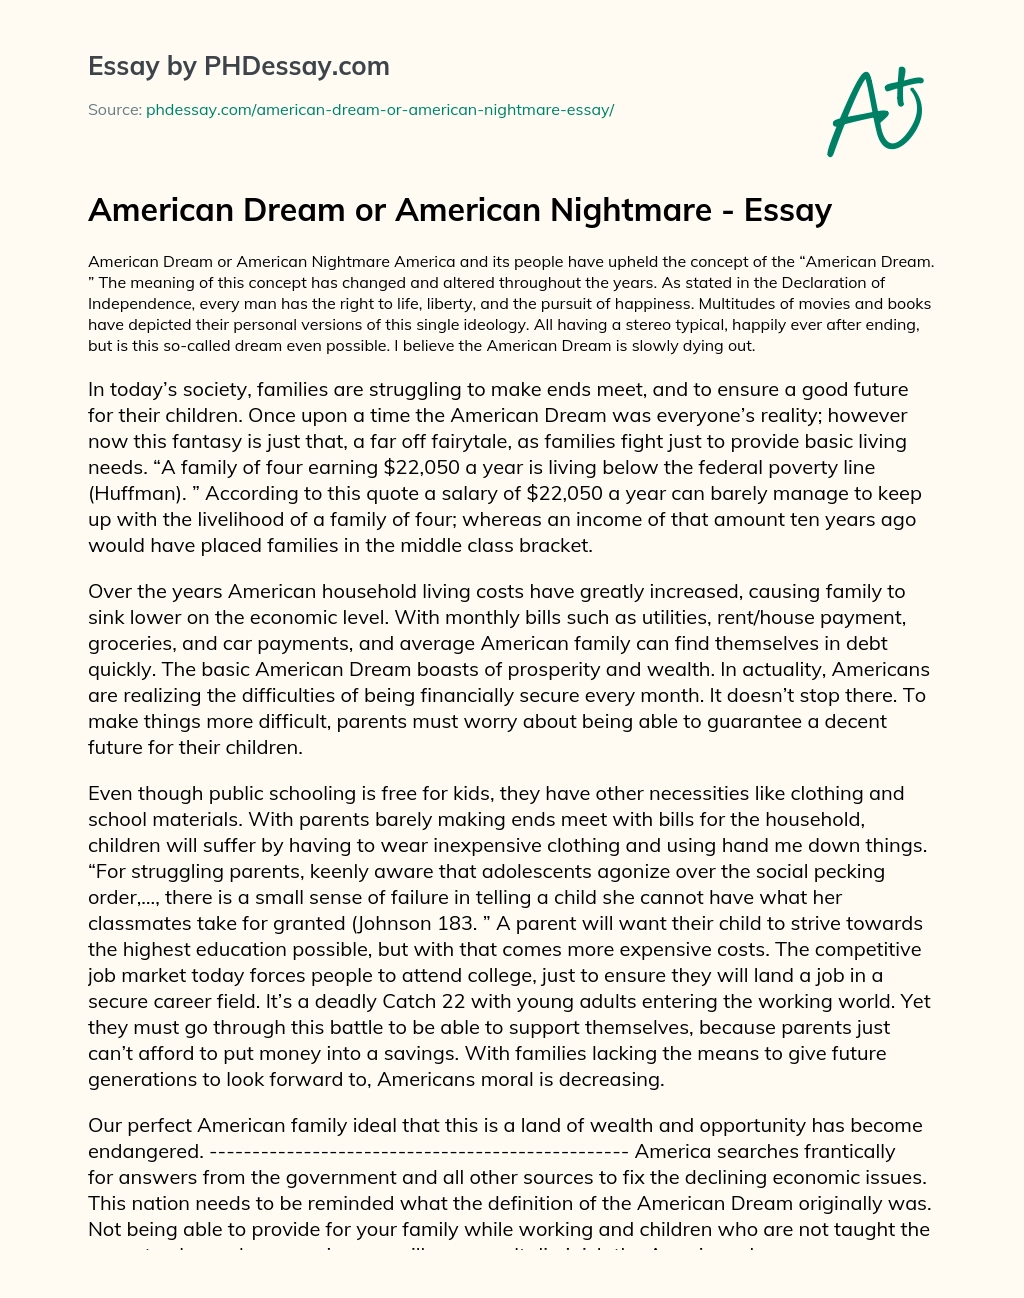 The Slow Death of the American Dream: Struggles of Families to Make Ends Meet essay